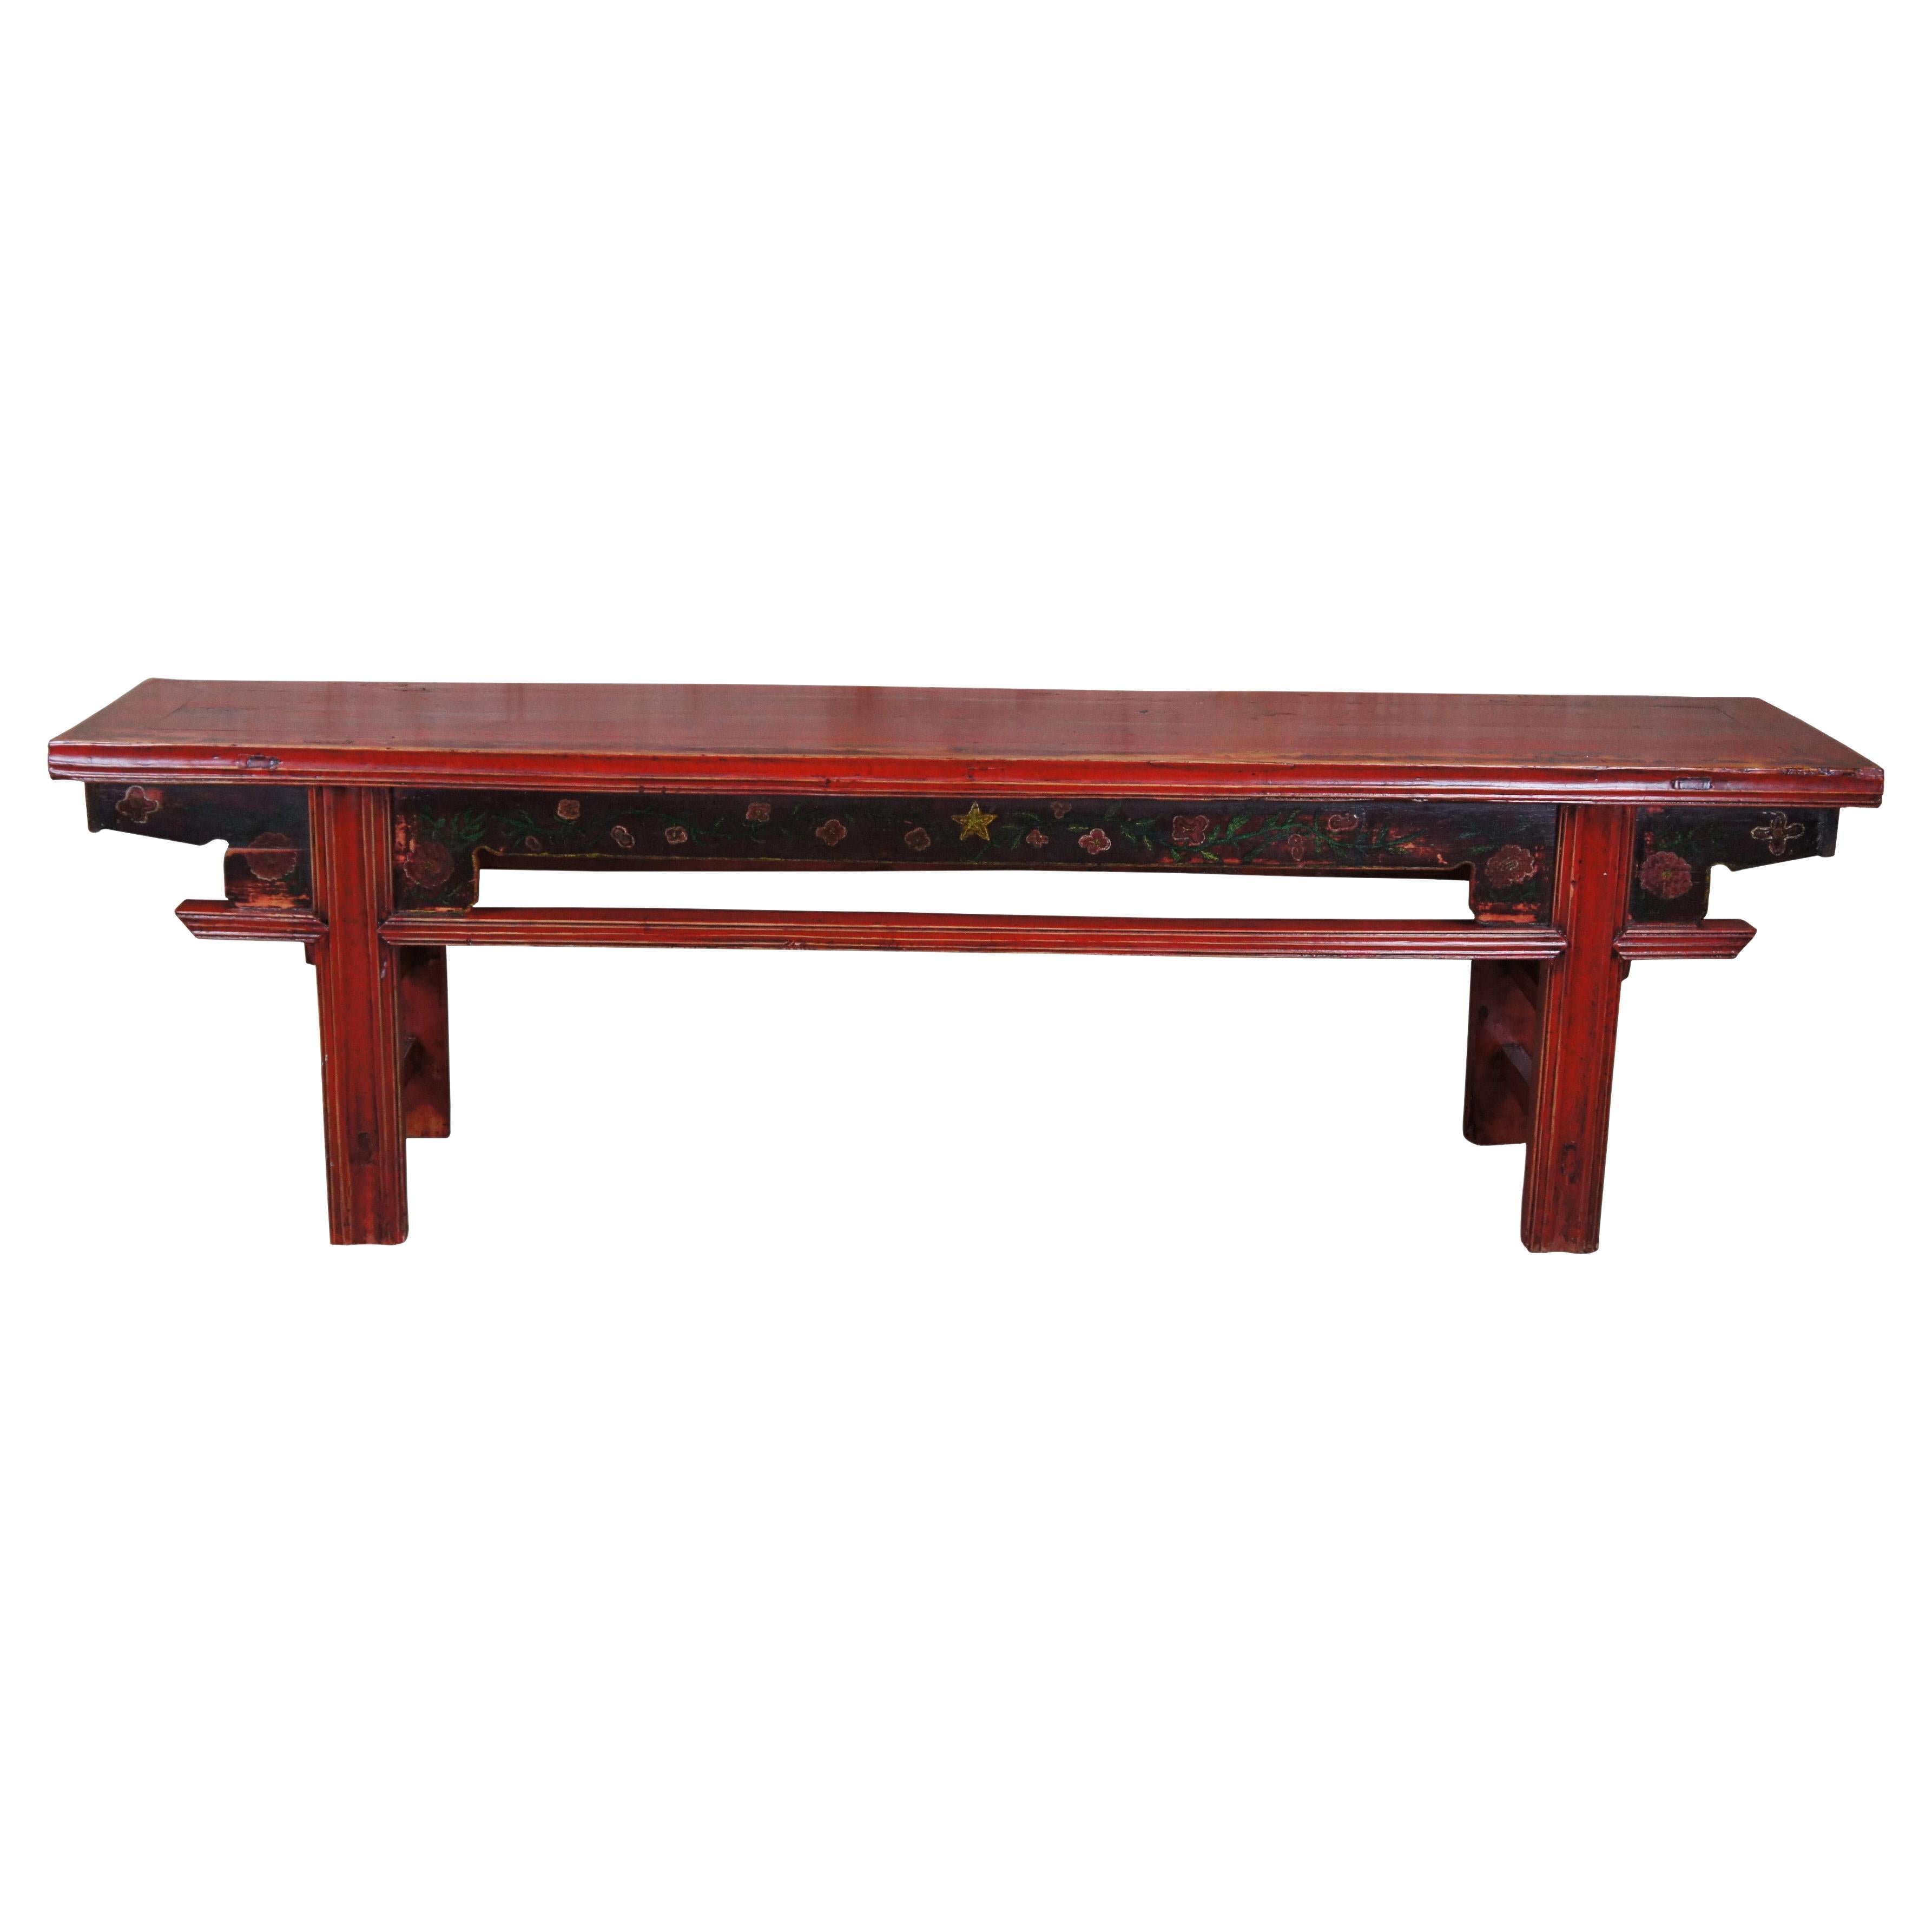 20th Century Chinese Elm Red Lacquer Chinoiserie Altar Hallway Bench Seat Pew For Sale